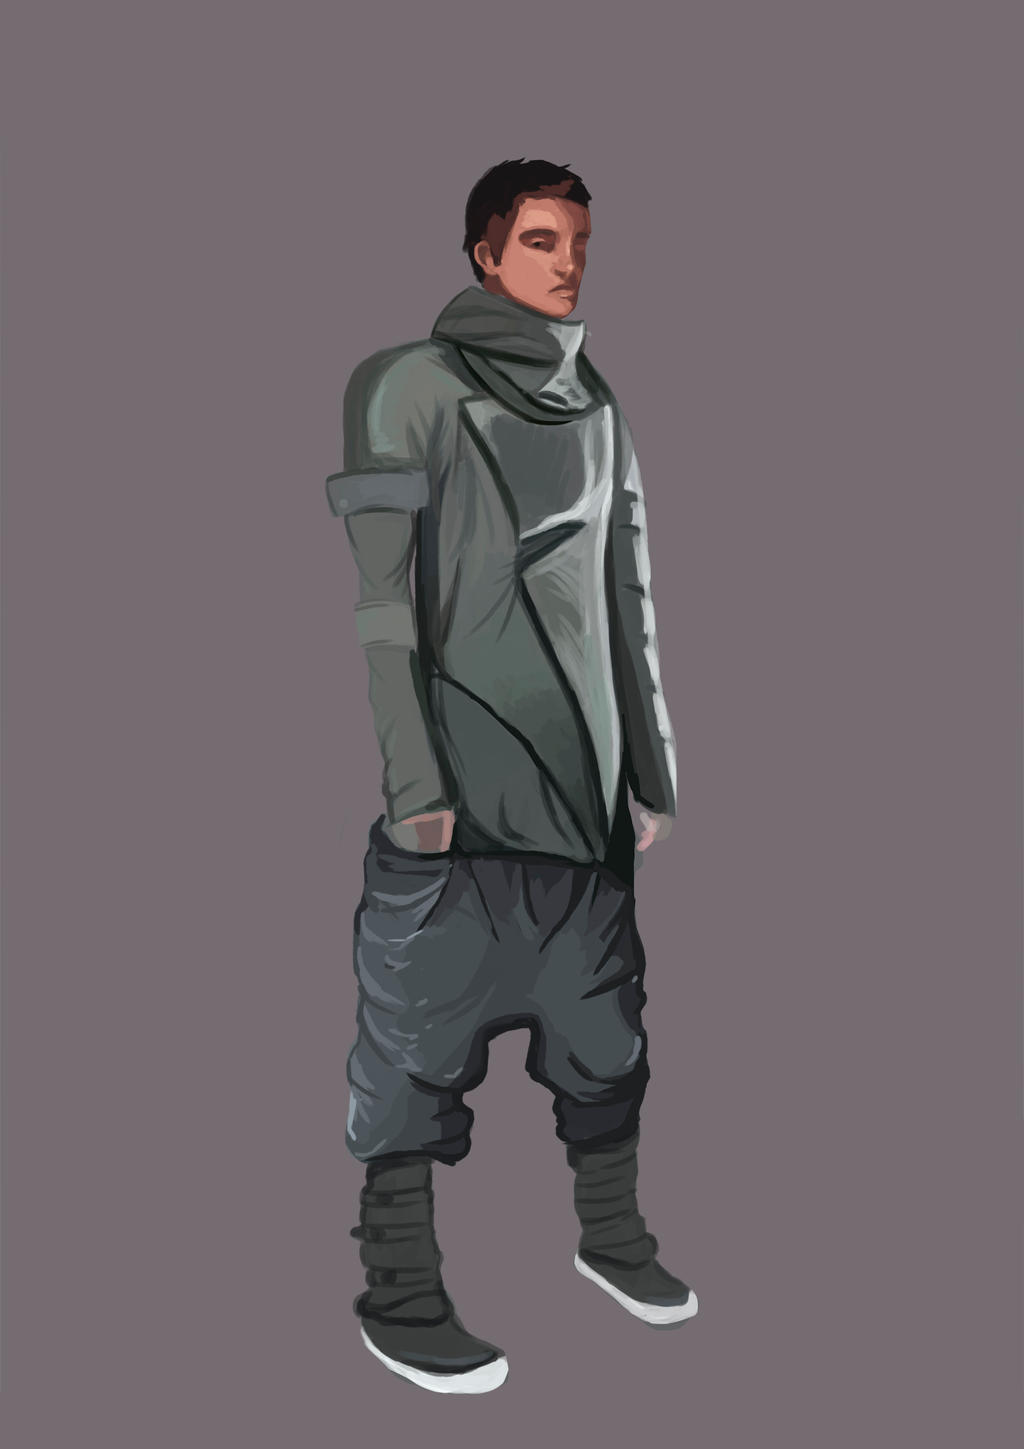 Pin by Includes character models on Character design  Cyberpunk clothes,  Character design inspiration, Character design